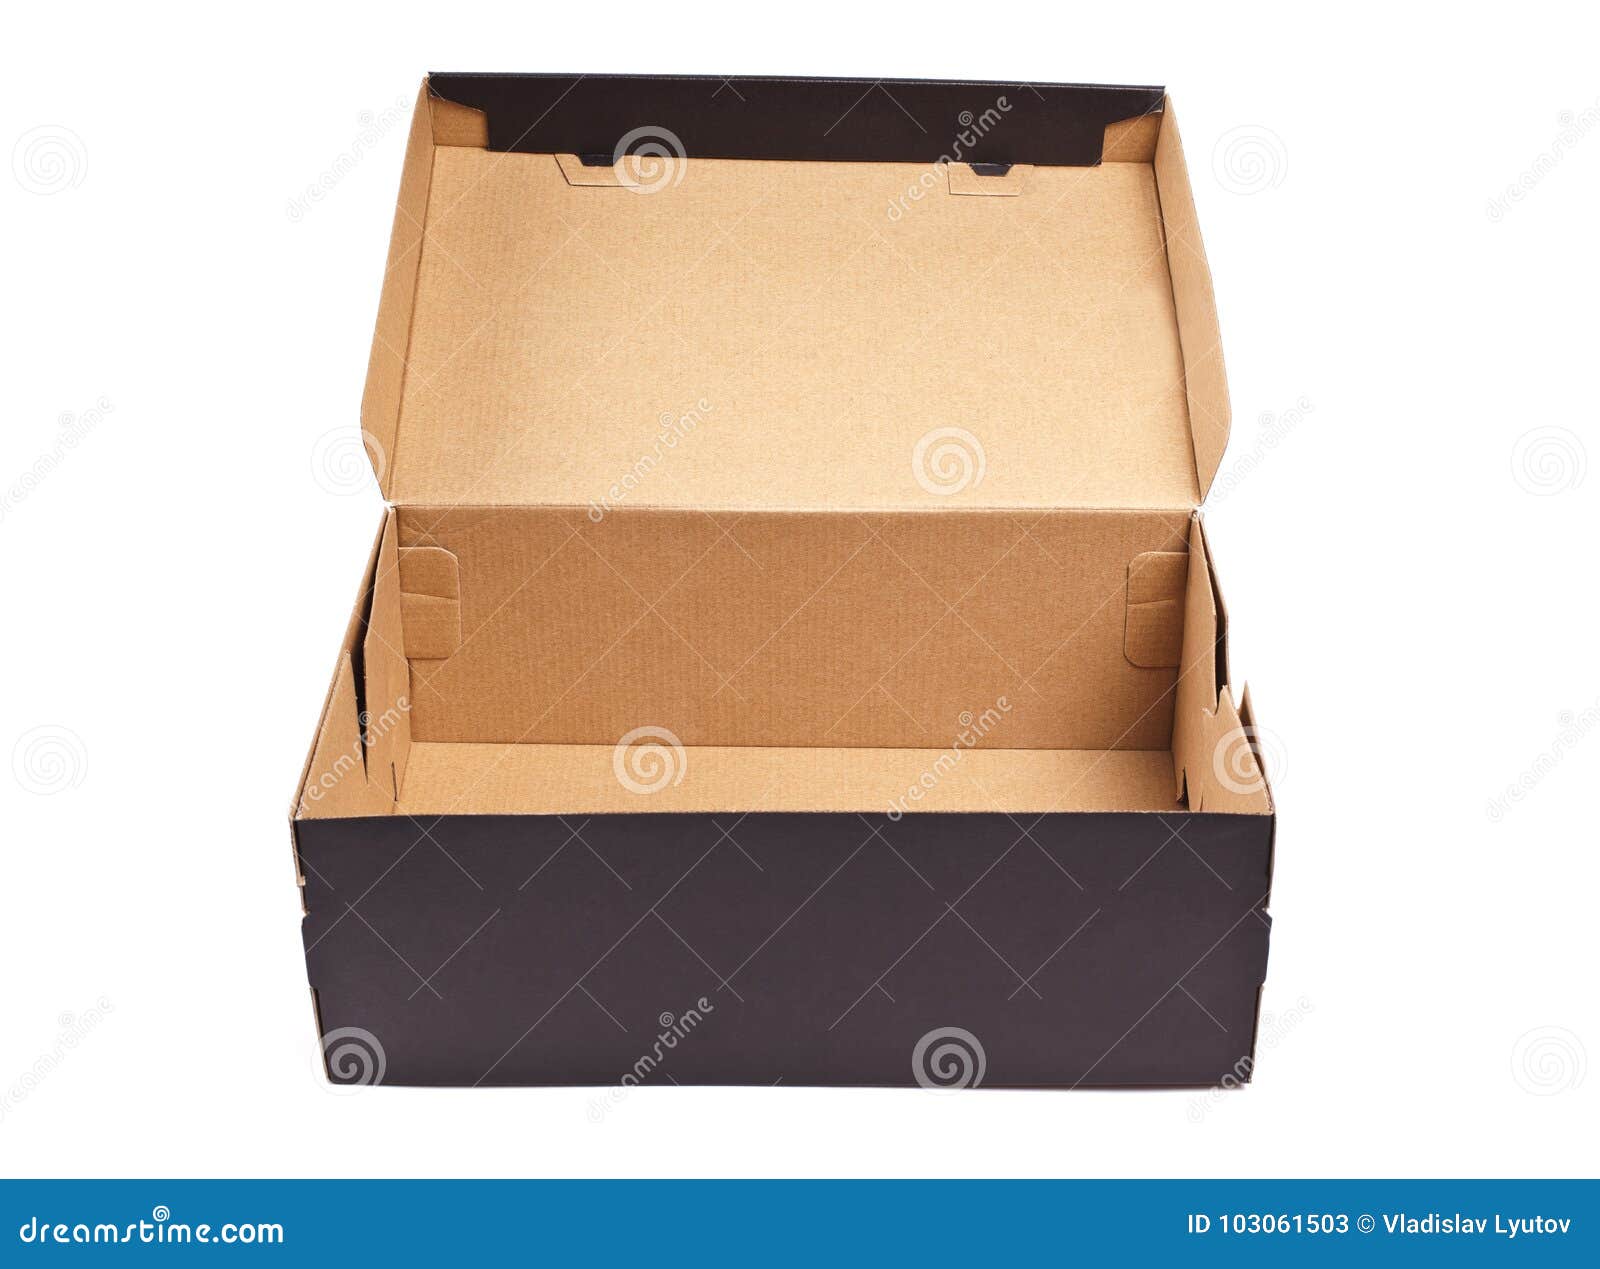 Download Open Black Cardboard Box With Lid Isolated On White ...